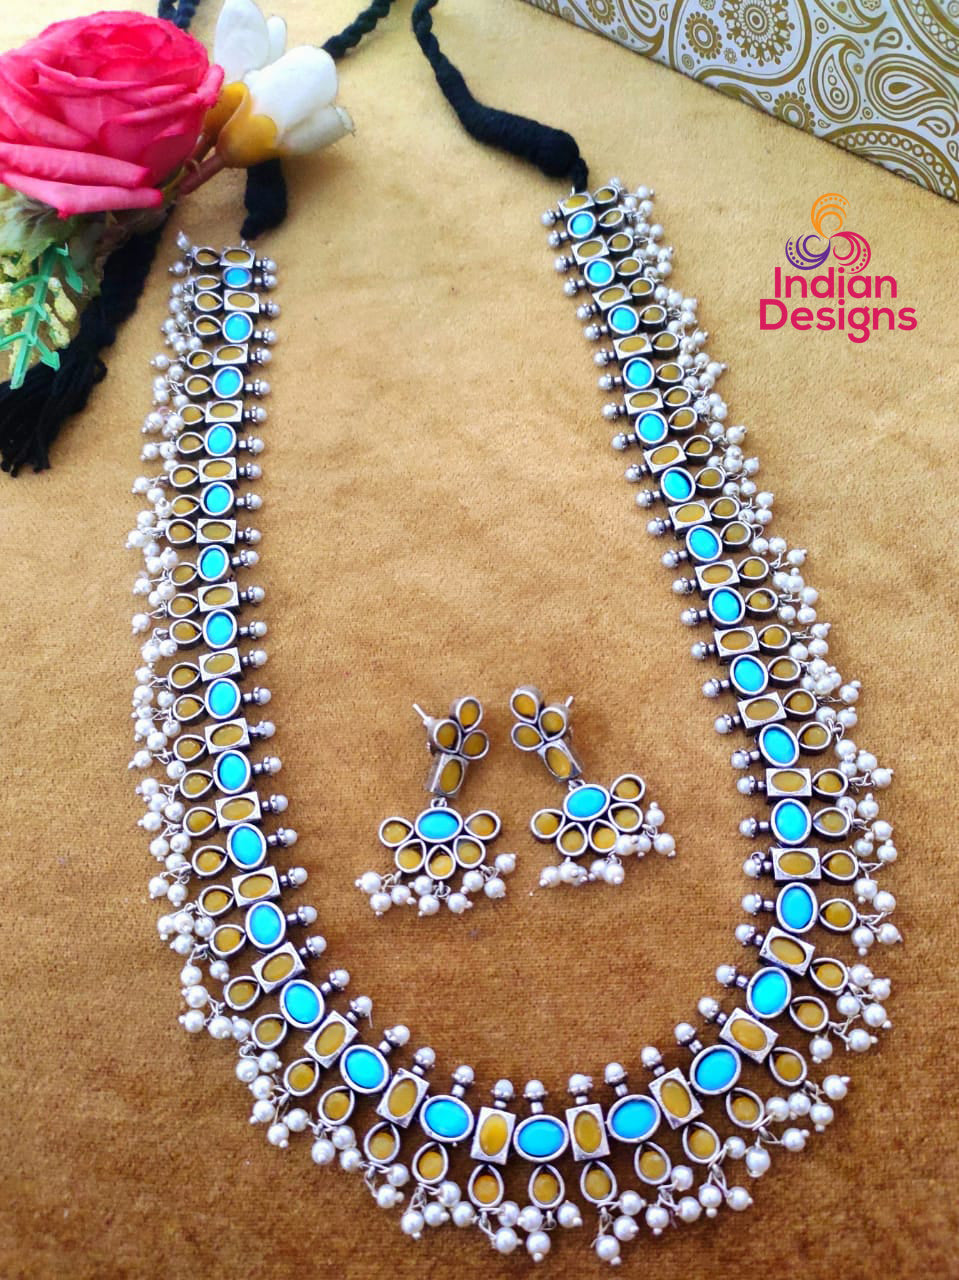 Indian Oxidized Silver set | German silver necklace for sarees | Indian Bollywood Necklace | Antique Silver necklace